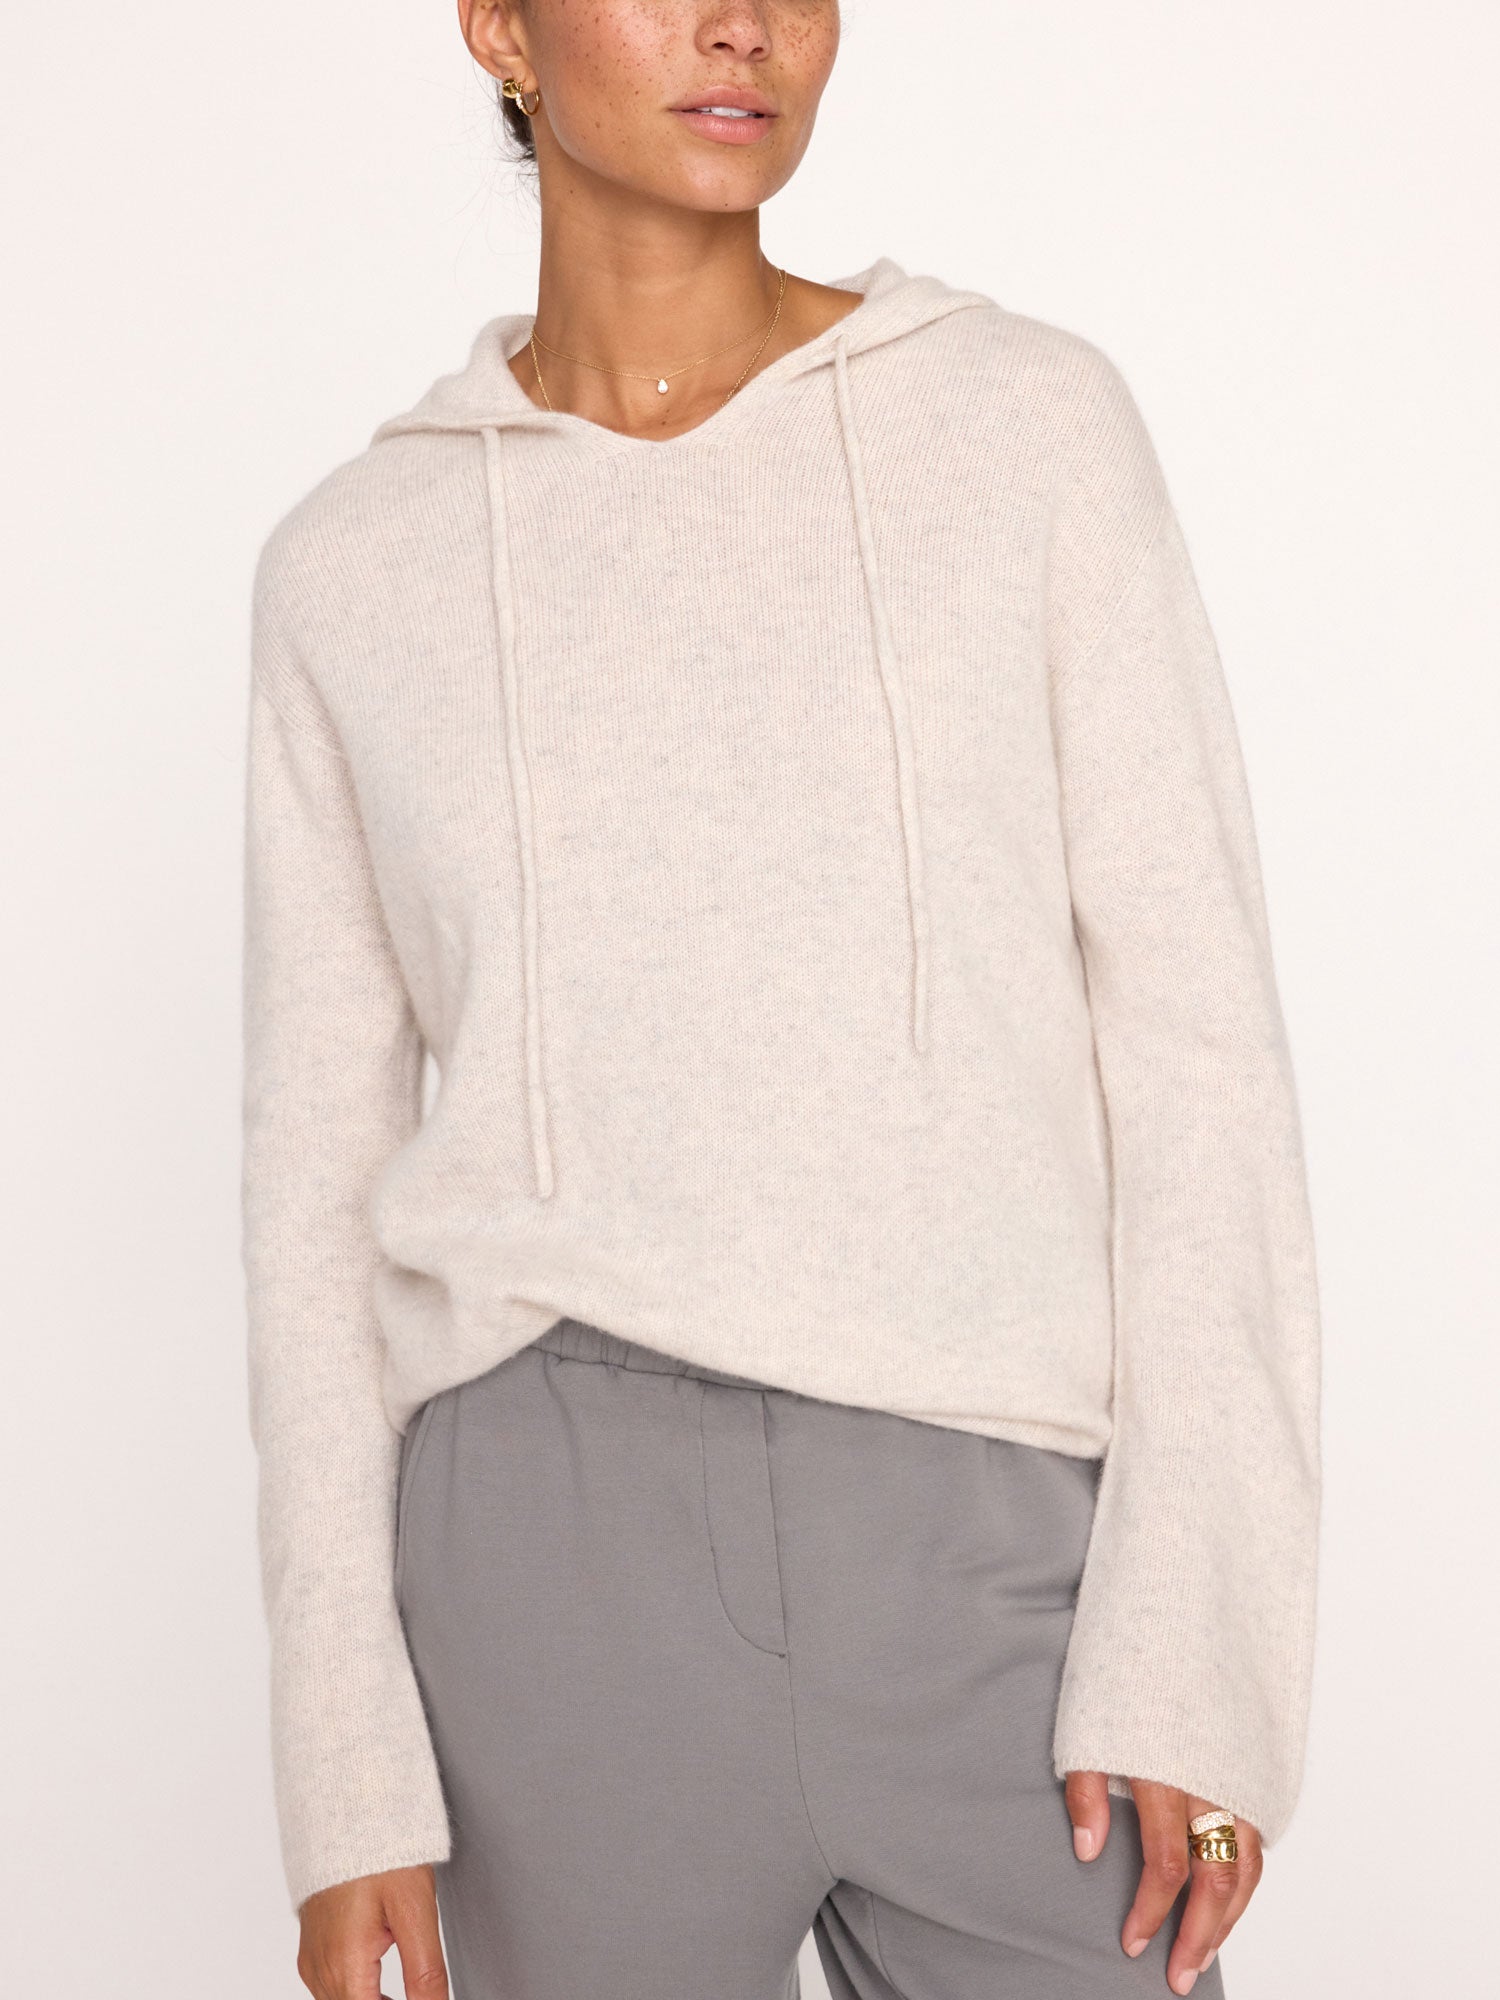 Cashmere beige hoodie sweater front view 3